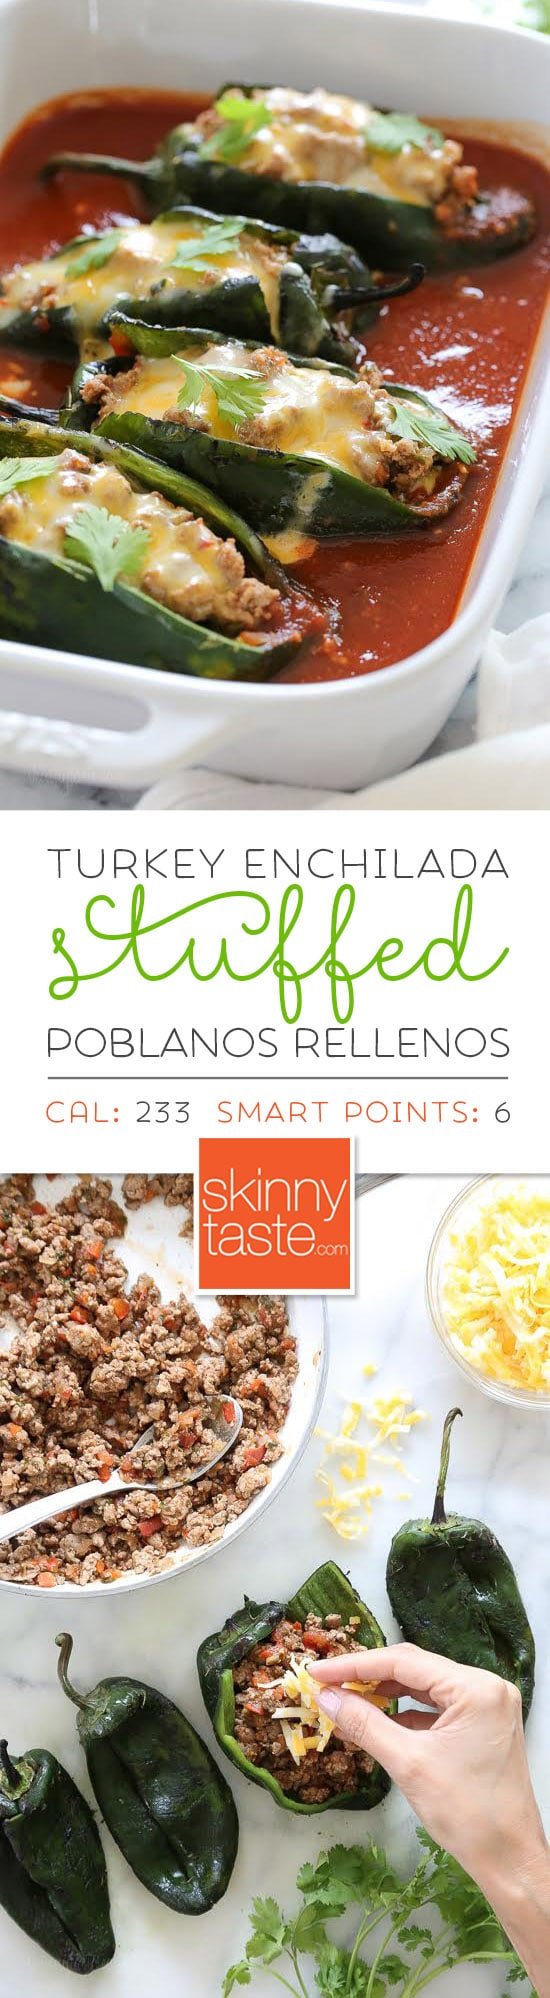 These baked Turkey Enchilada Stuffed Poblanos Rellenos are stuffed with a flavorful ground turkey filling, topped with my homemade enchilada sauce and cheese. These are so much lighter than restaurant chile rellenos which are typically battered in egg and deep fried.